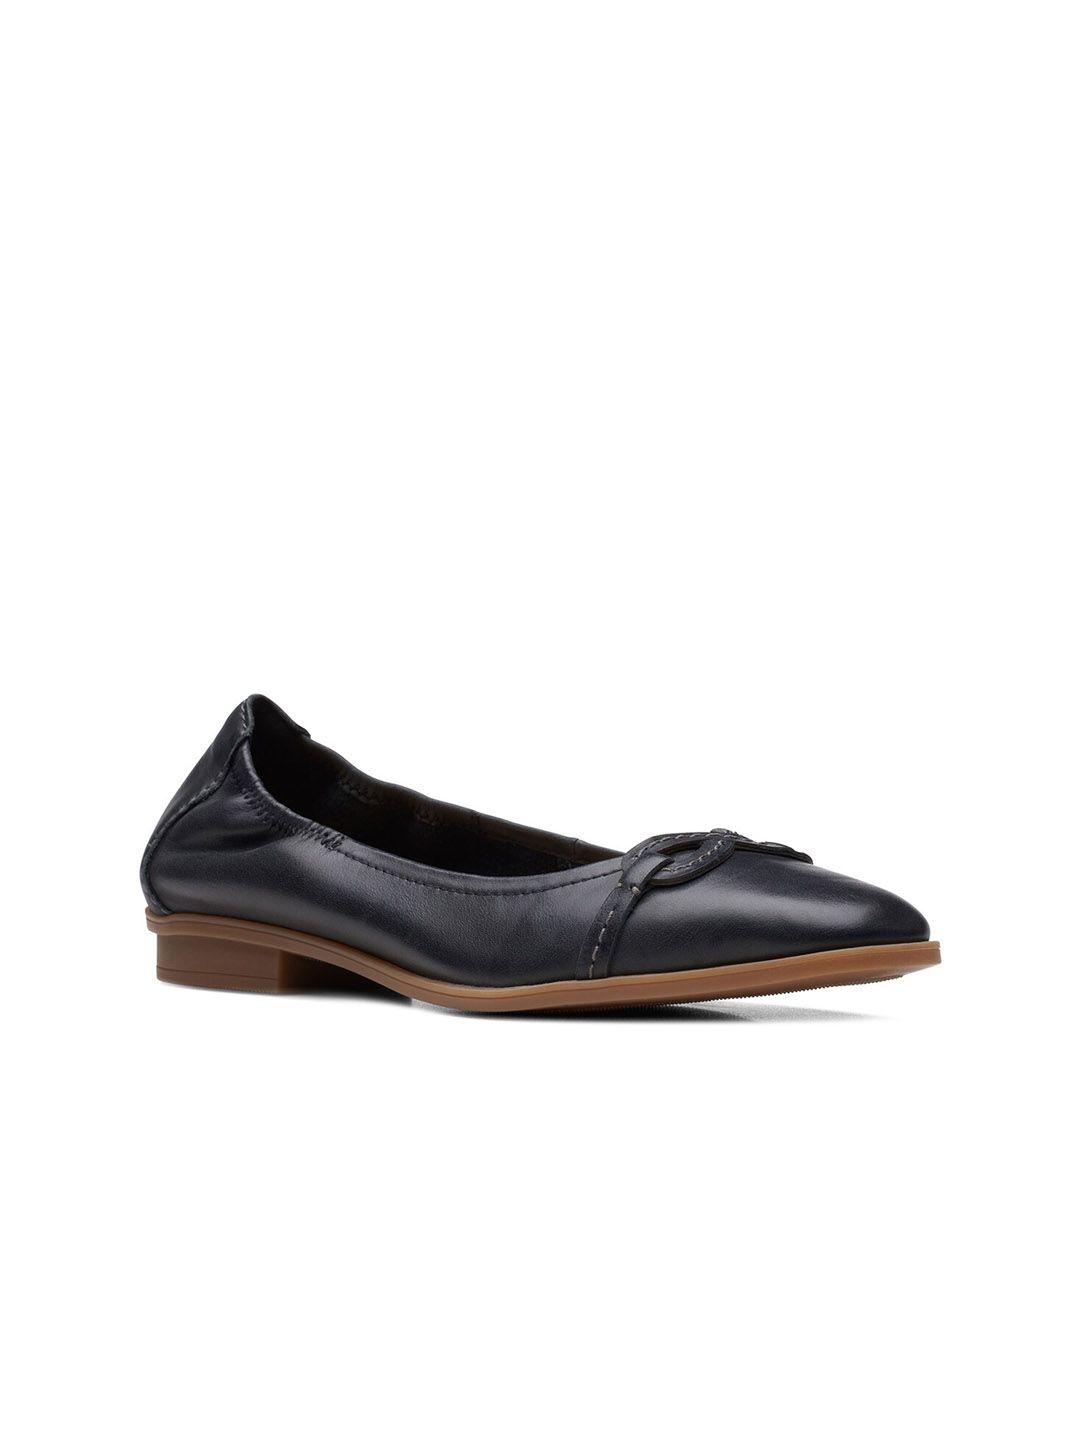 clarks women lyrical rhyme leather ballerinas with bows